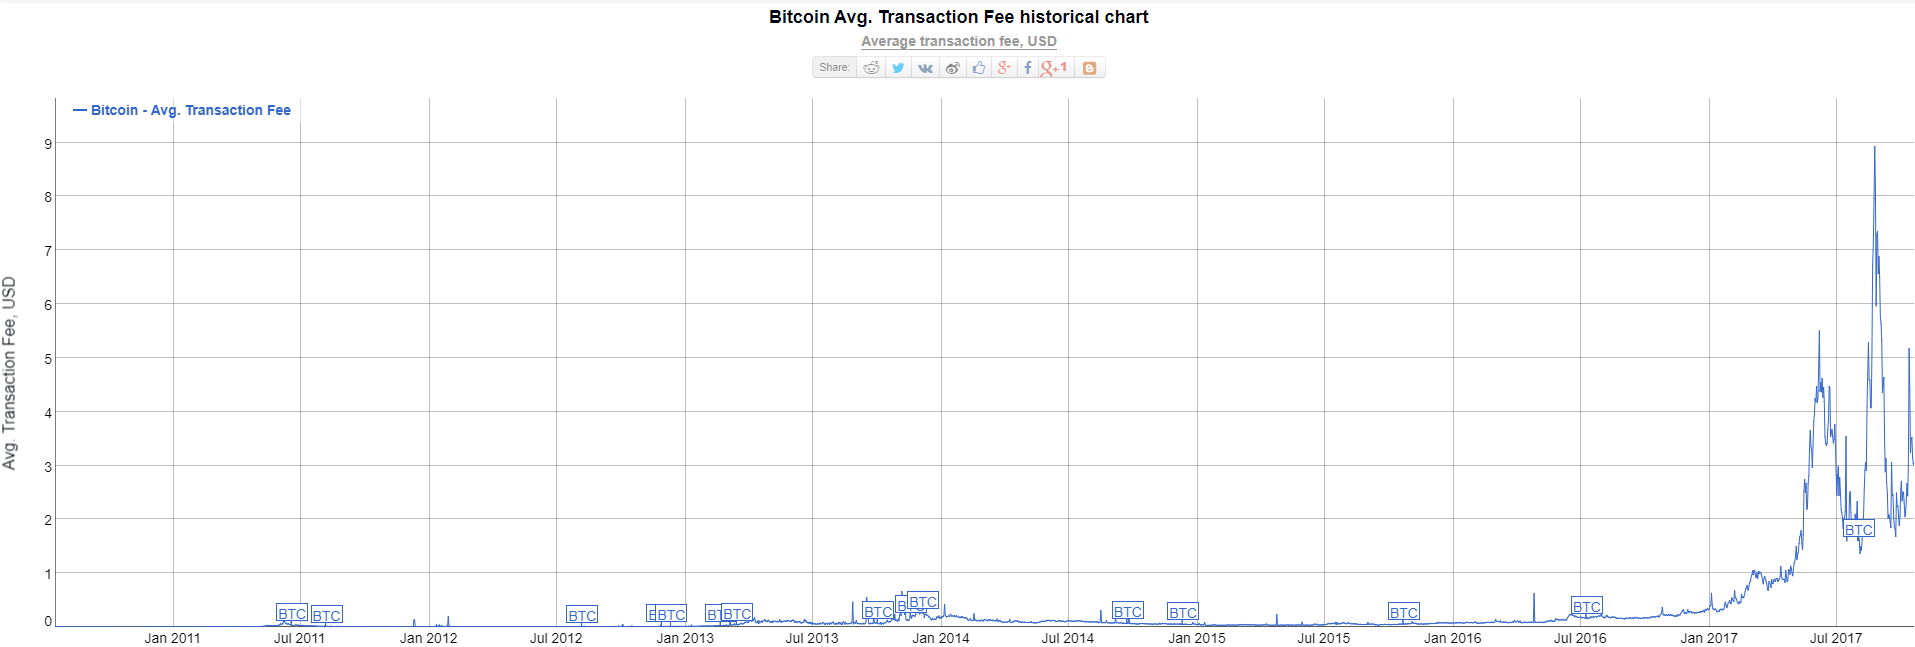 Bitcoin Fees Over Time